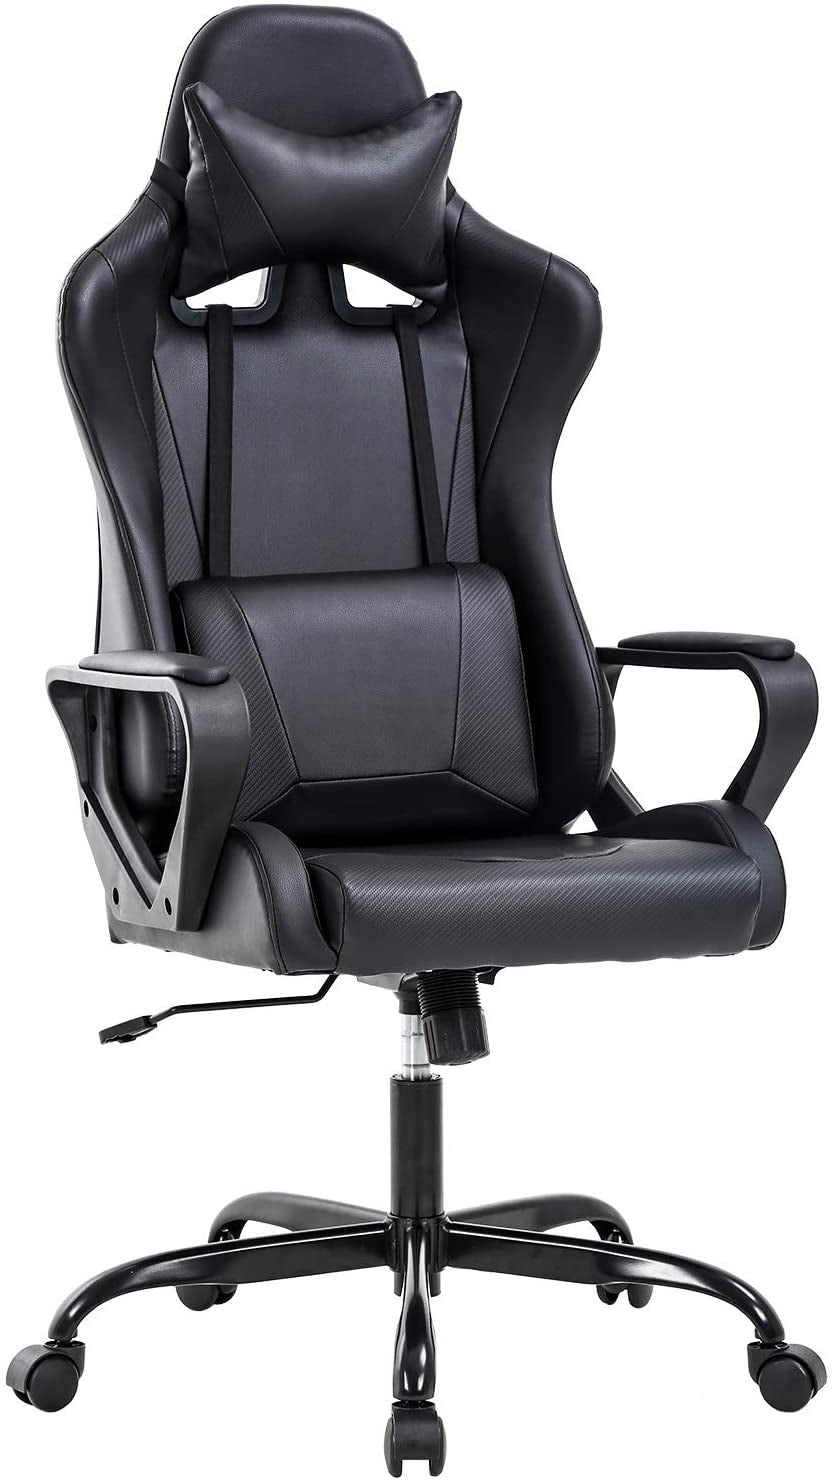 Bestoffice Office Chair Gaming Chair Desk Chair Ergonomic Racing Style Executive Chair with Lumbar Support Adjustable Stool Swivel Rolling Computer Chair for Women,Man